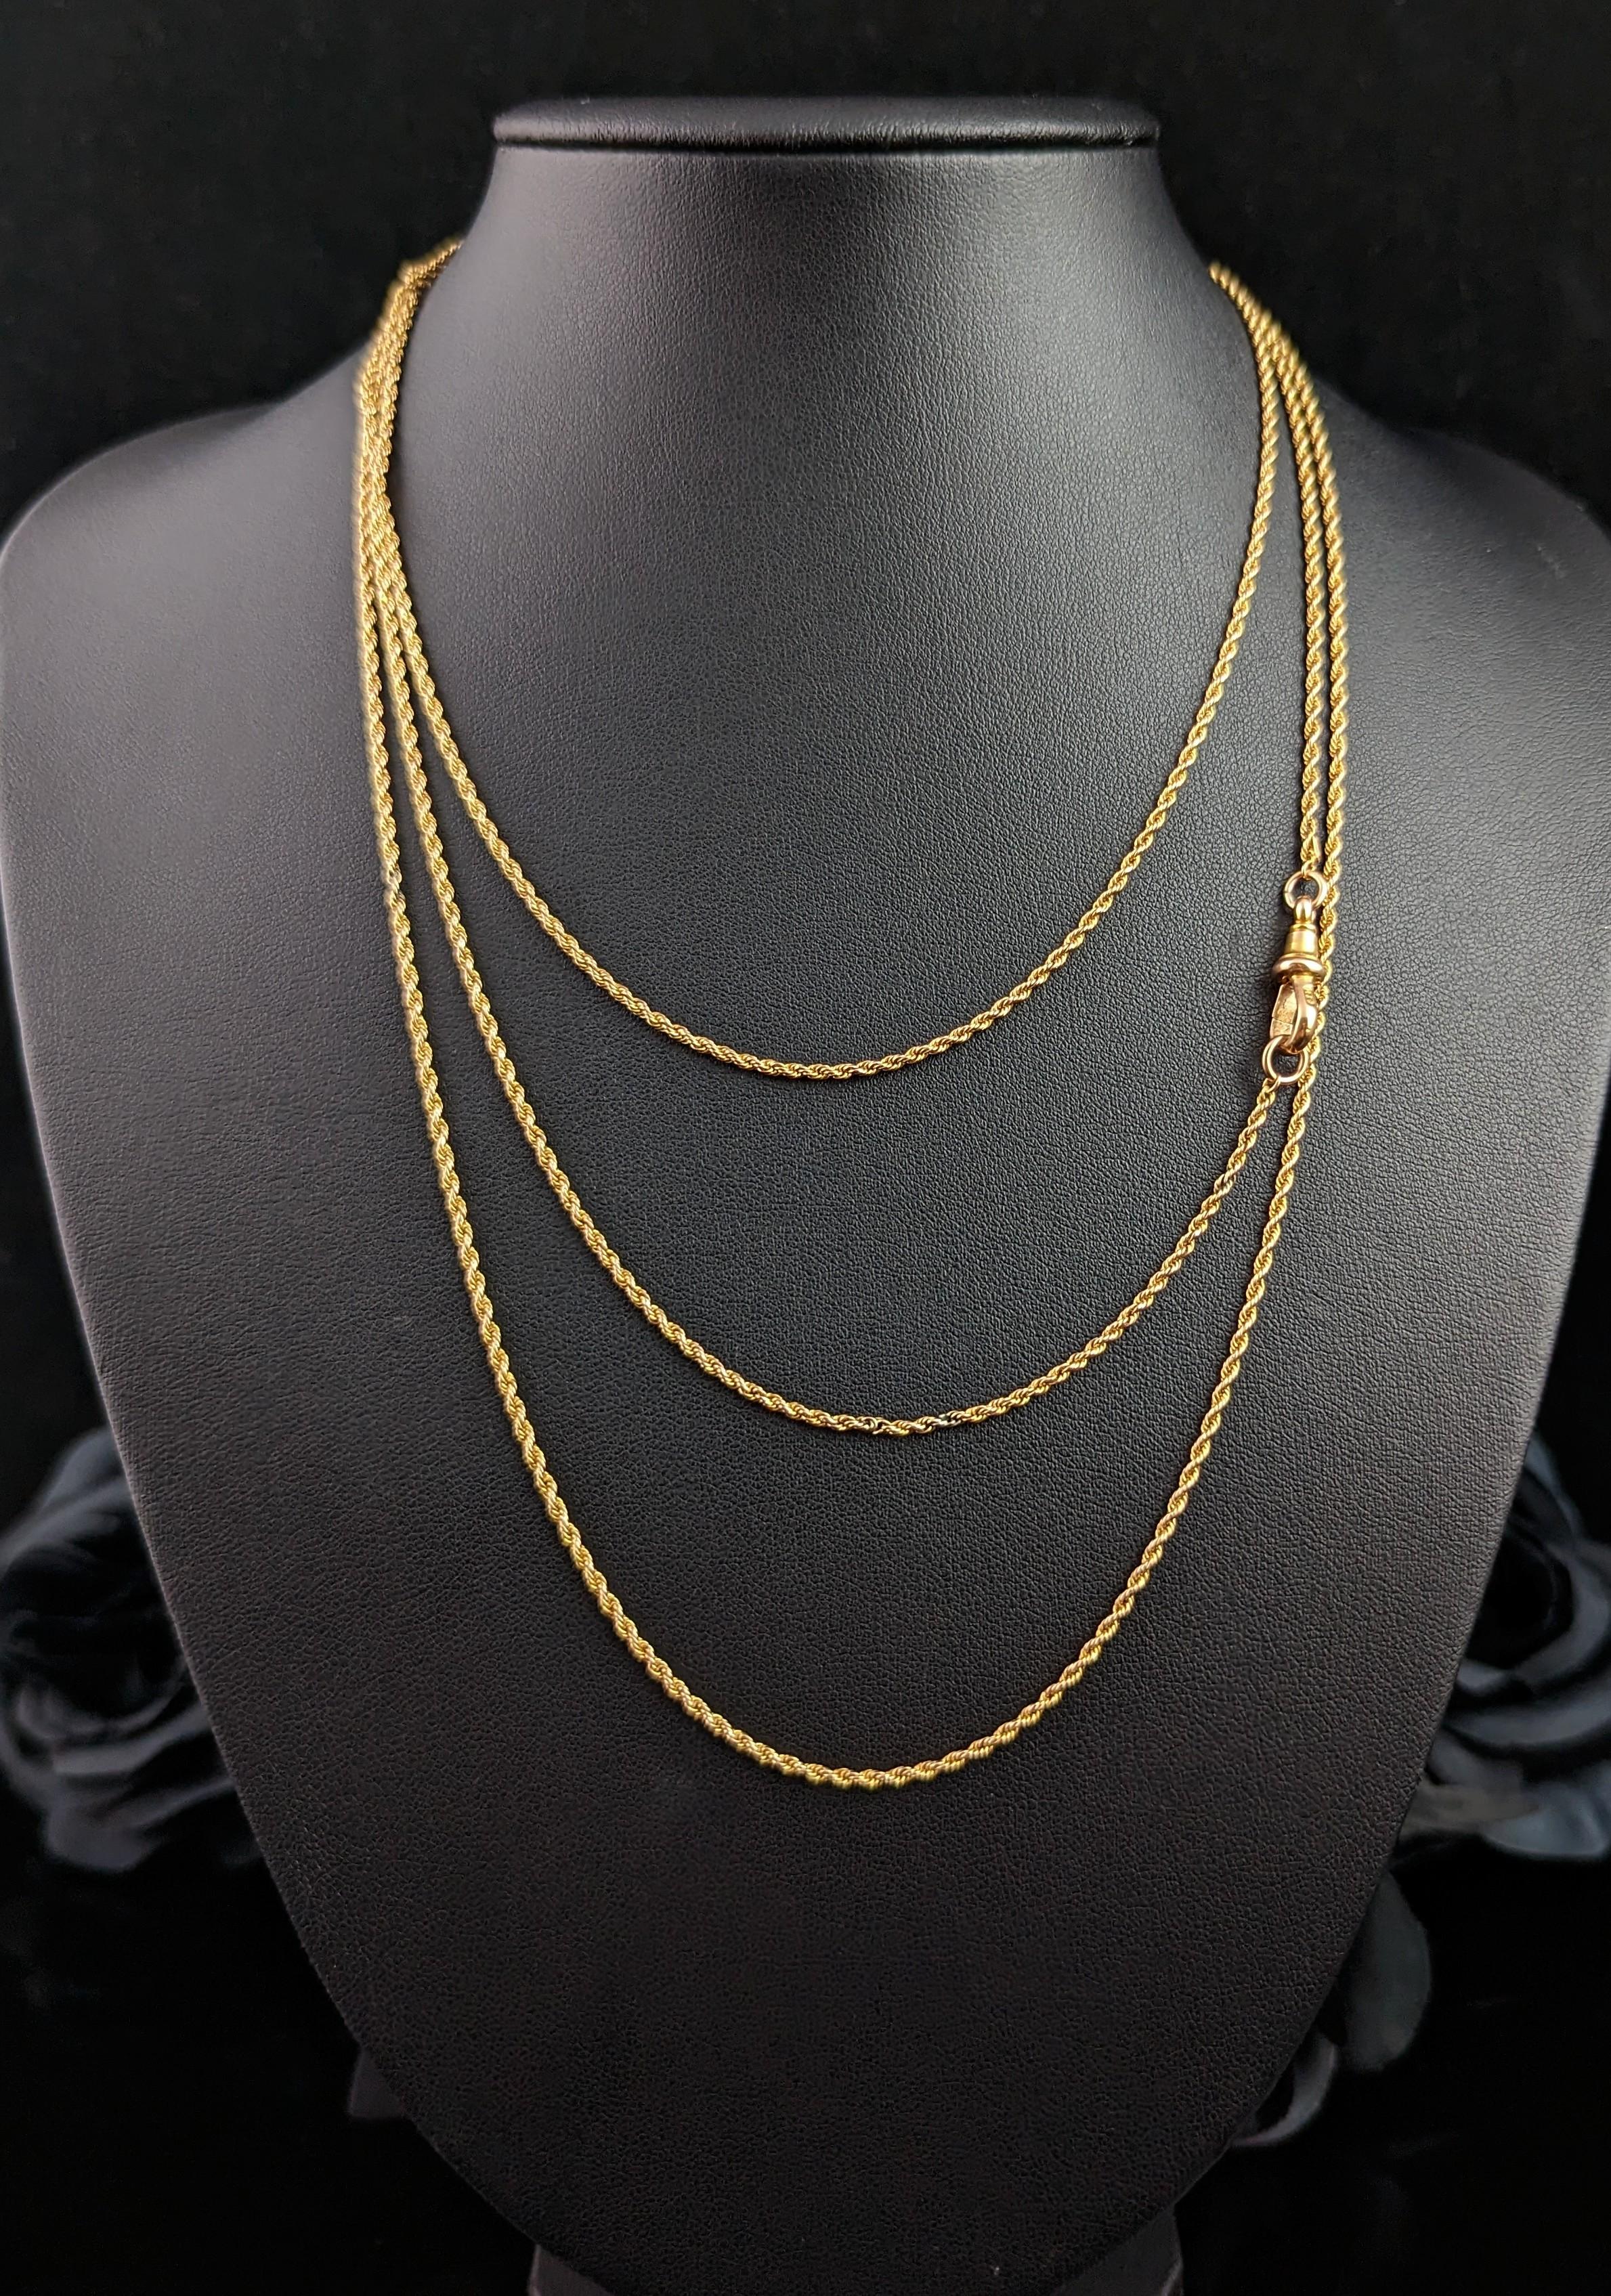 Antique 15k Yellow Gold Long Chain Necklace, Longuard, Rope Twist Link For Sale 5